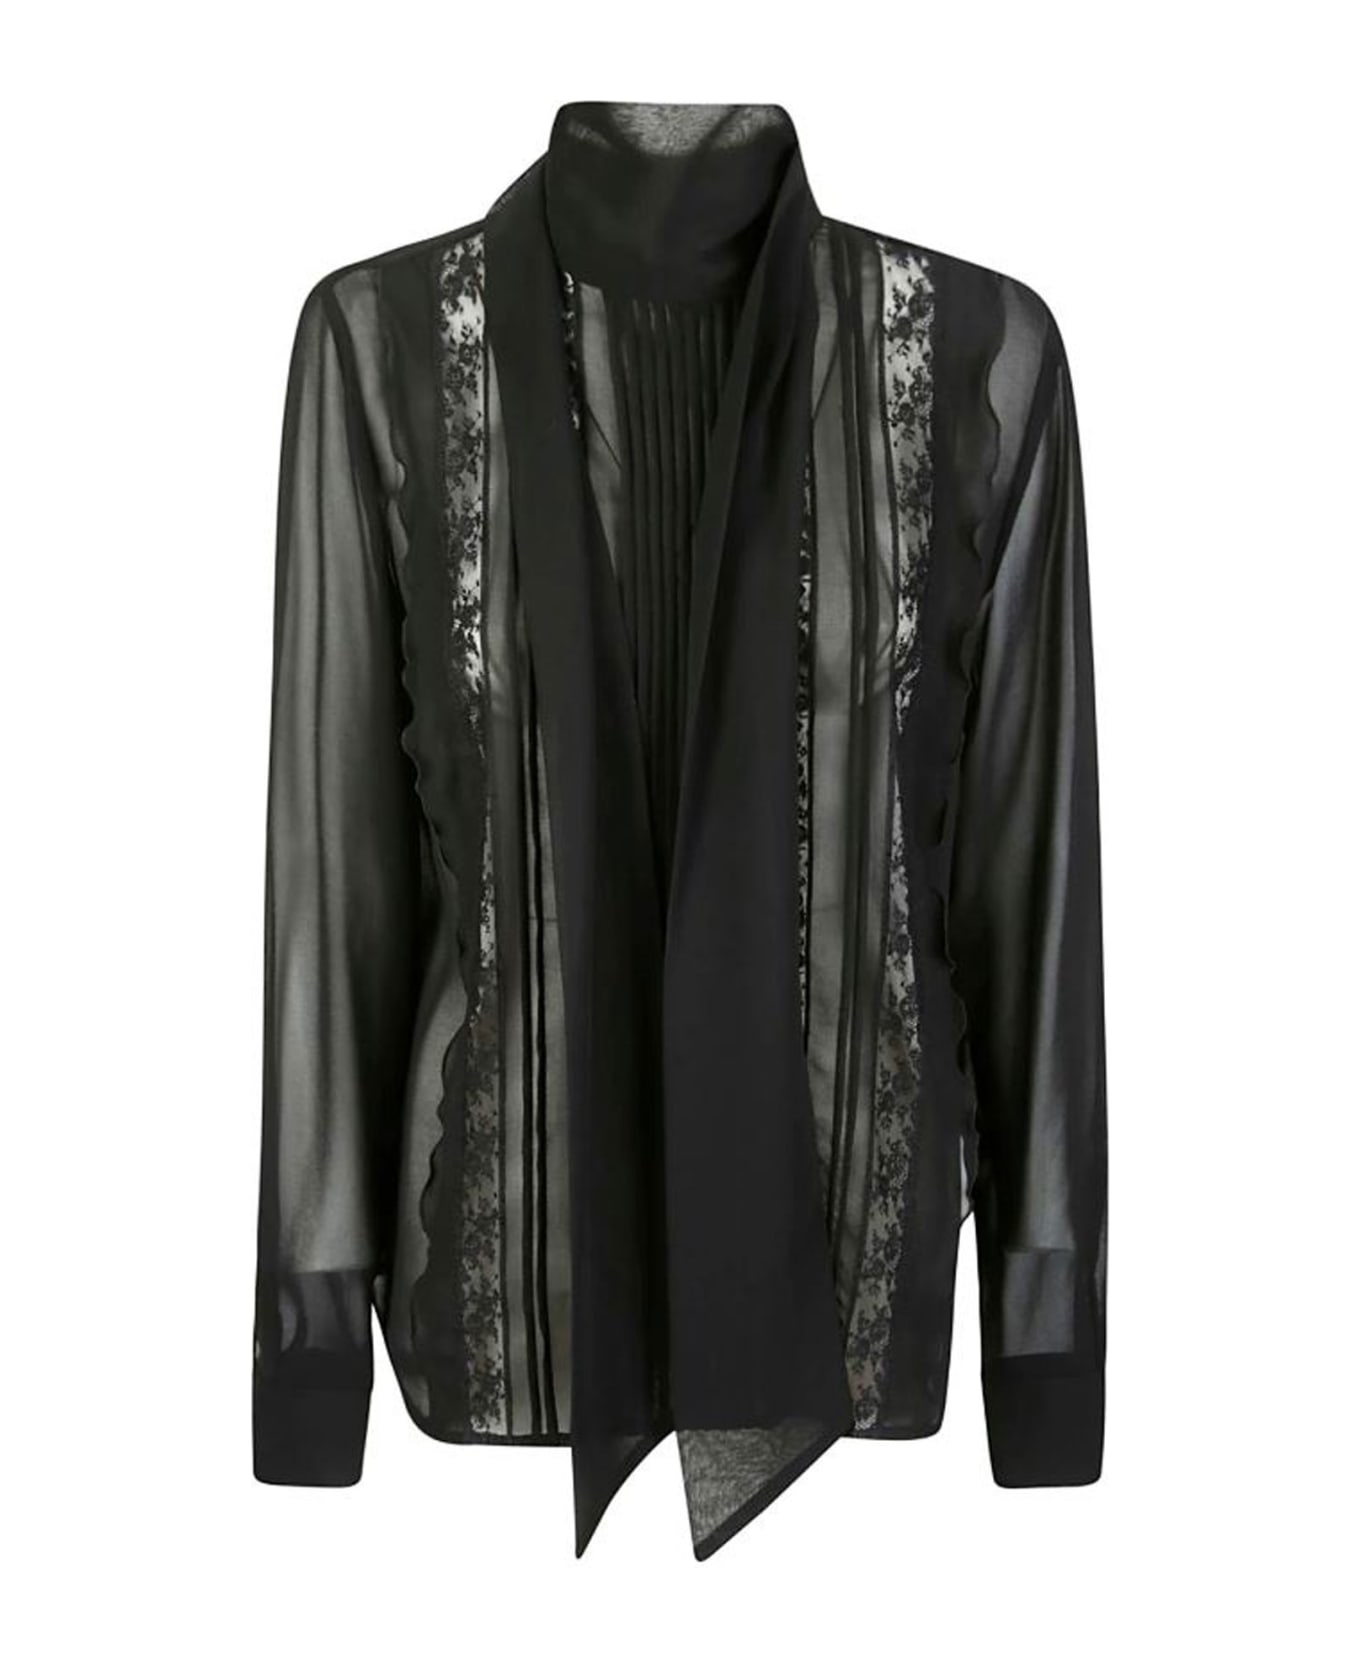 Parosh Black Shirt With Embroidery And Transparency - NERO シャツ